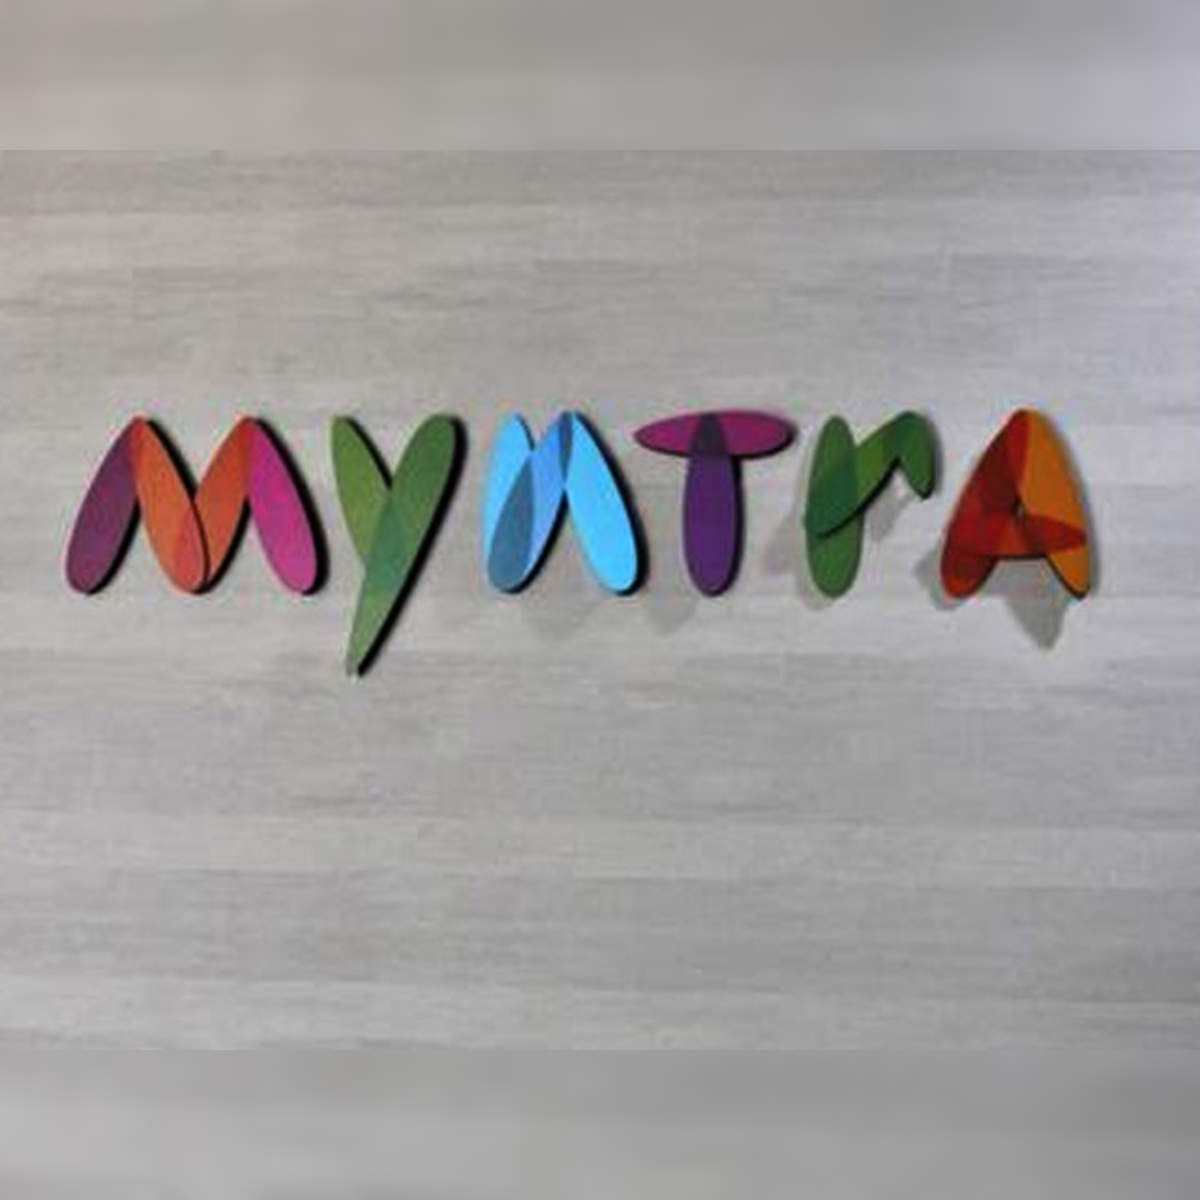 Myntra buys a 51% stake in Hrithik Roshan's lifestyle brand HRX